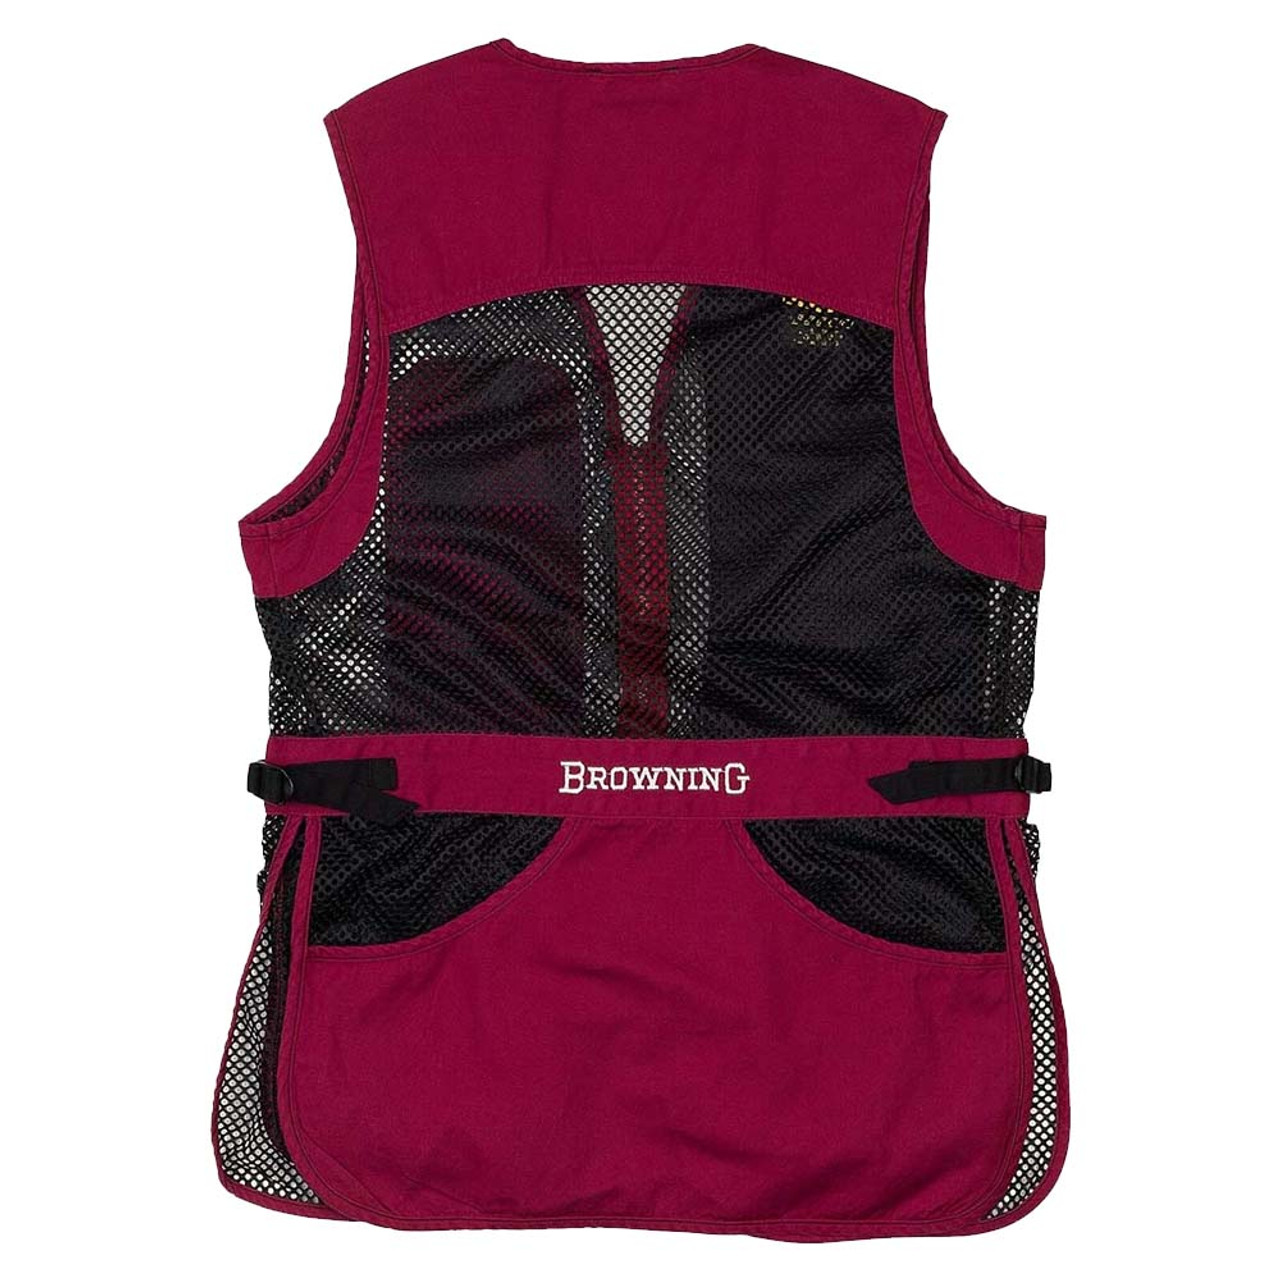 Browning Women’s Trapper Creek Shooting Vest-Cassis- Back